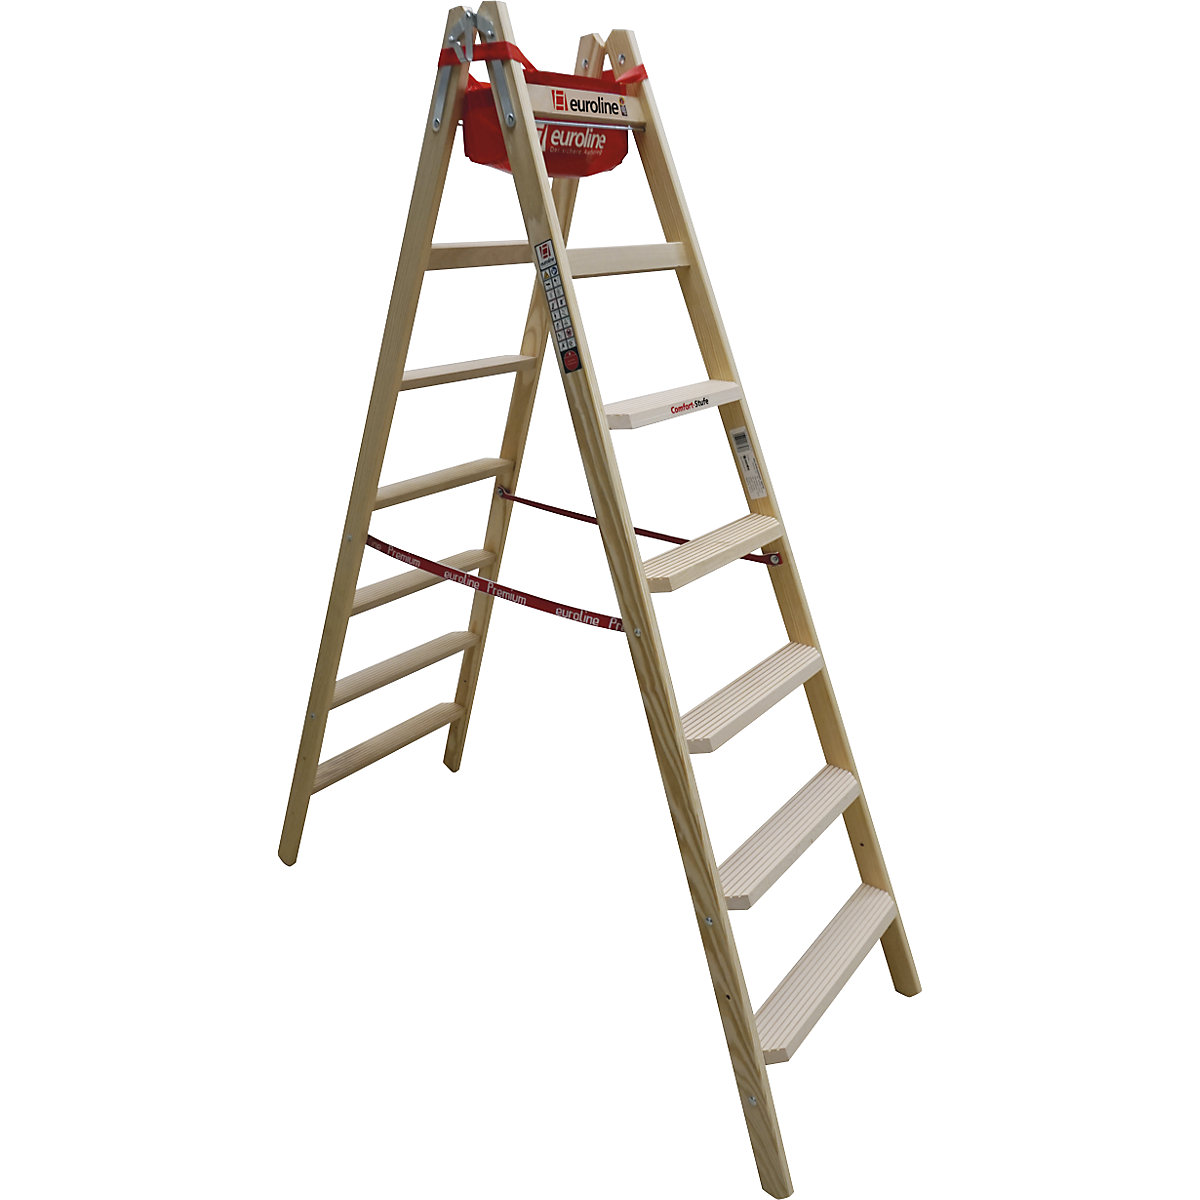 Wooden step ladder with comfort steps – euroline, double sided access, 2 x 7 steps-2